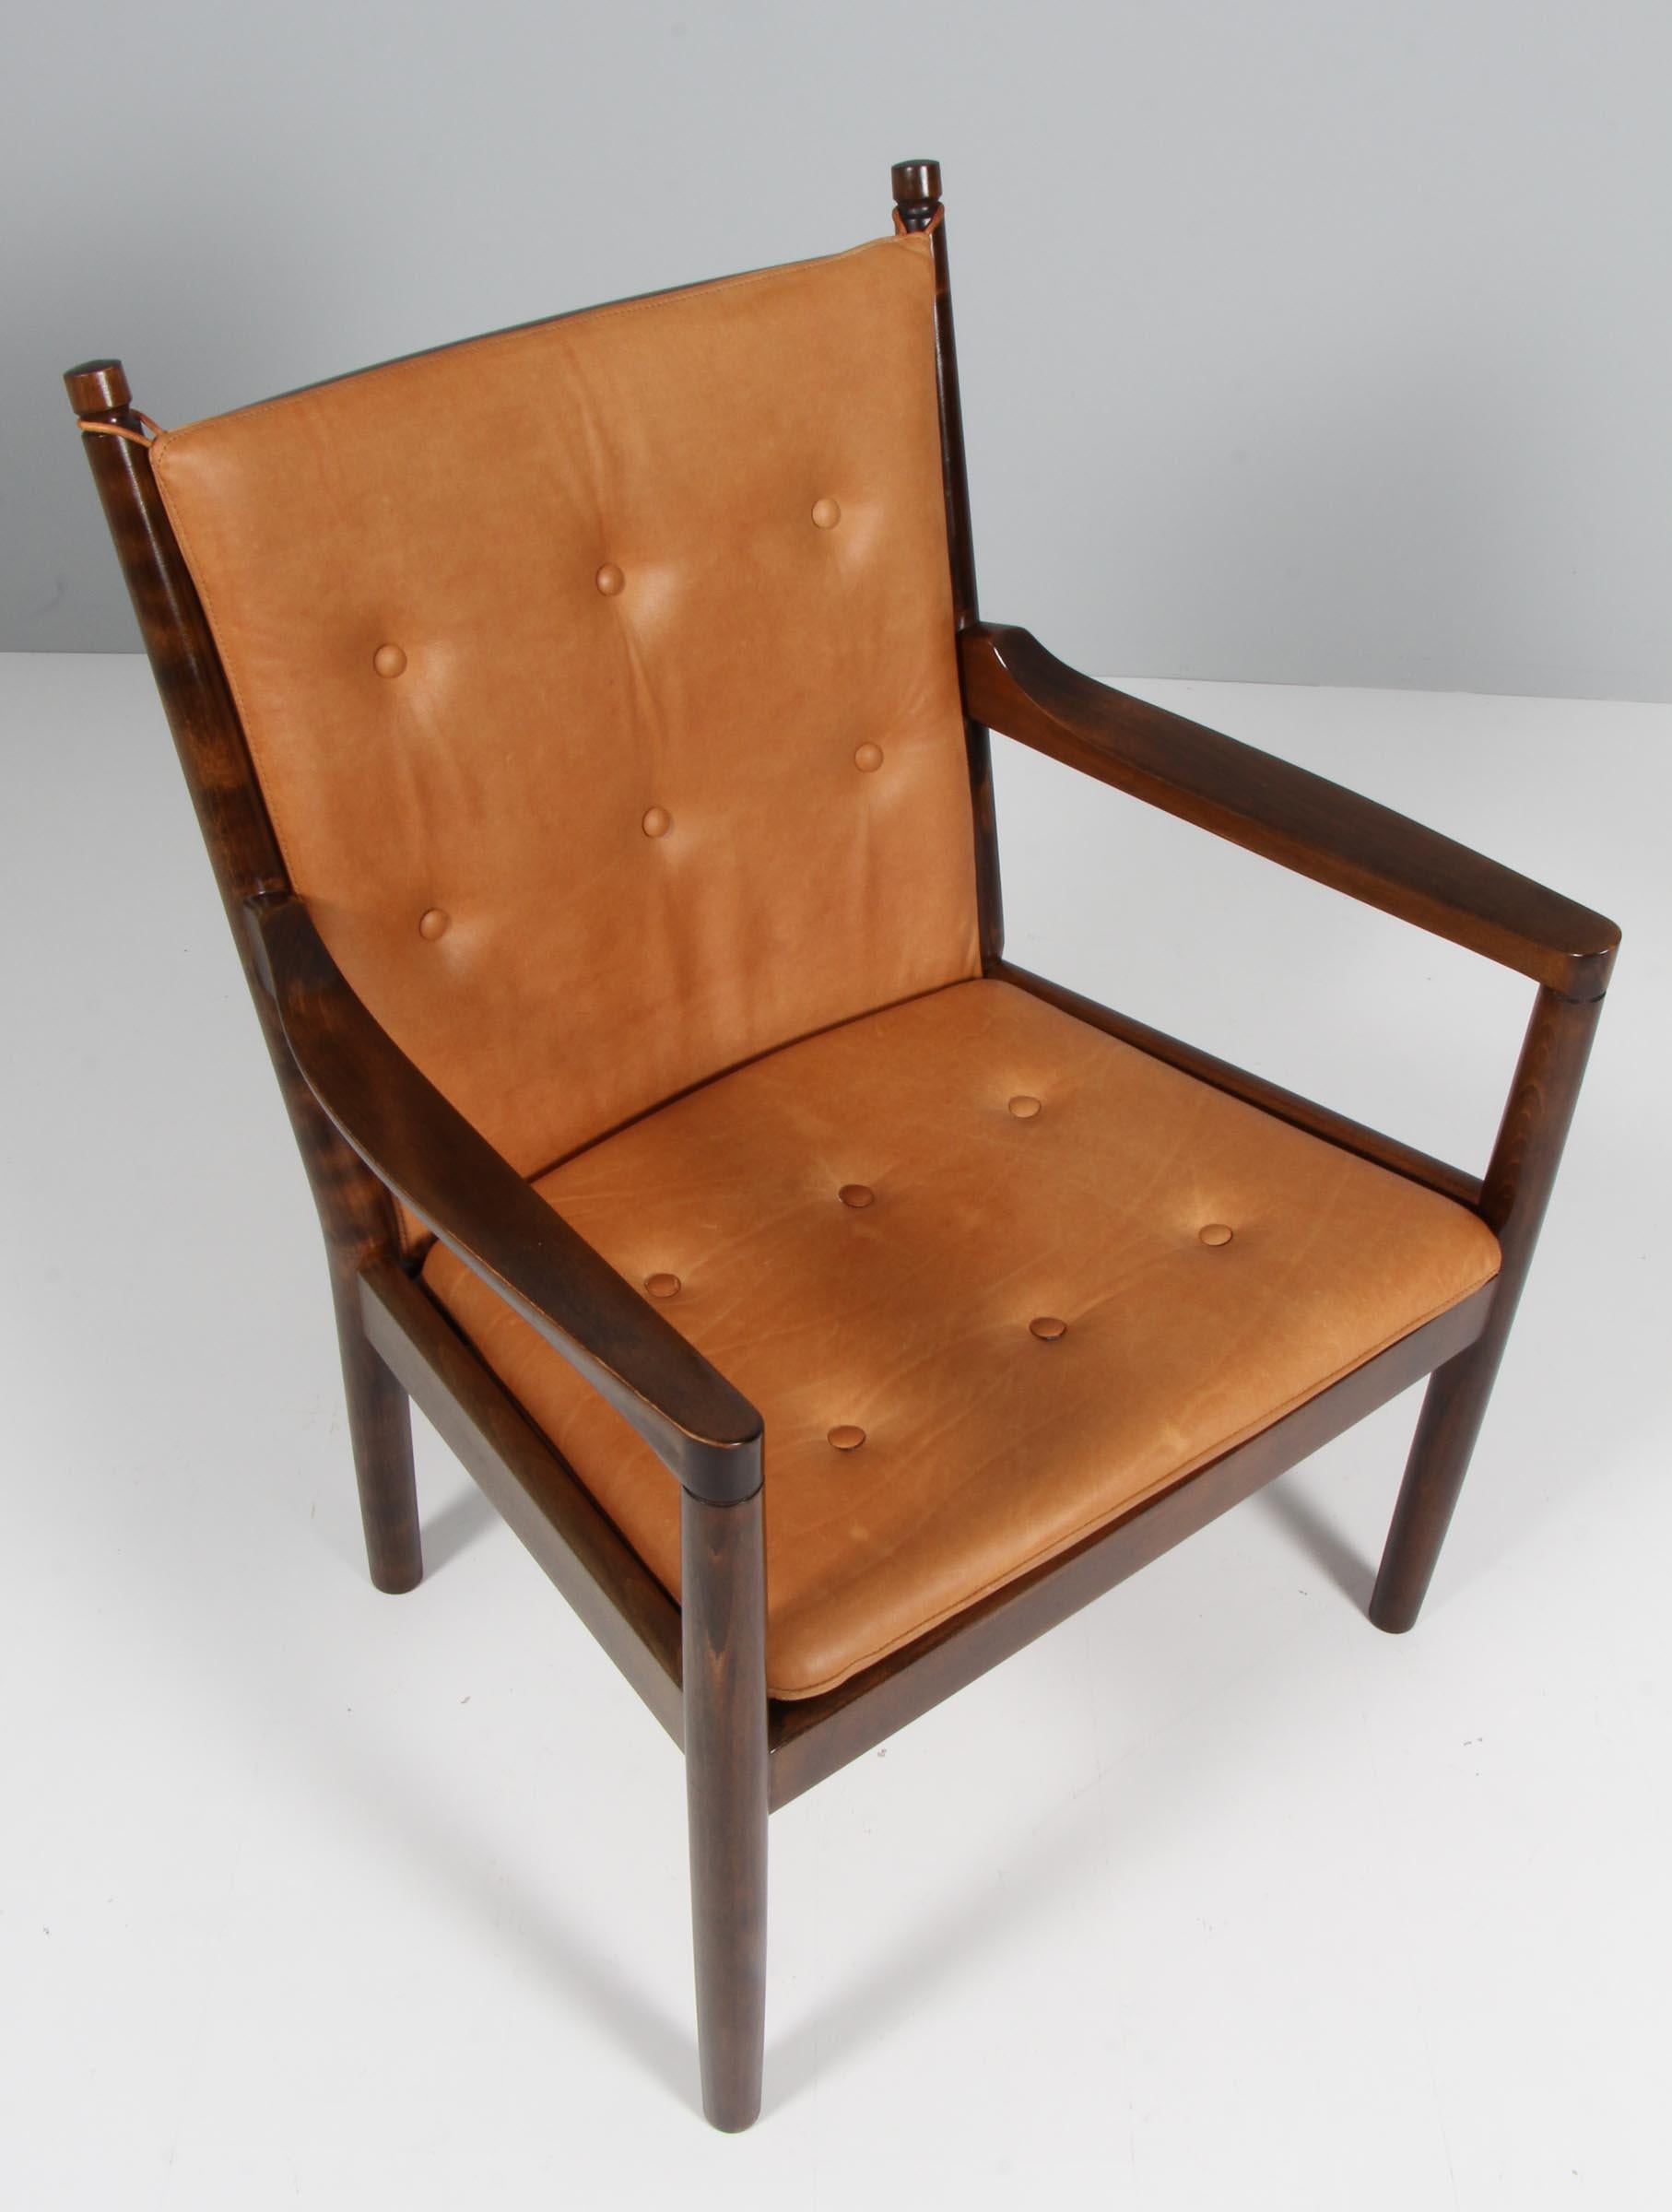 Hans Wegner, lounge or armchair new upholstered with tan aniline leather.

Frame in solid stained beech.

Model 1788, made by Fritz Hansen.

